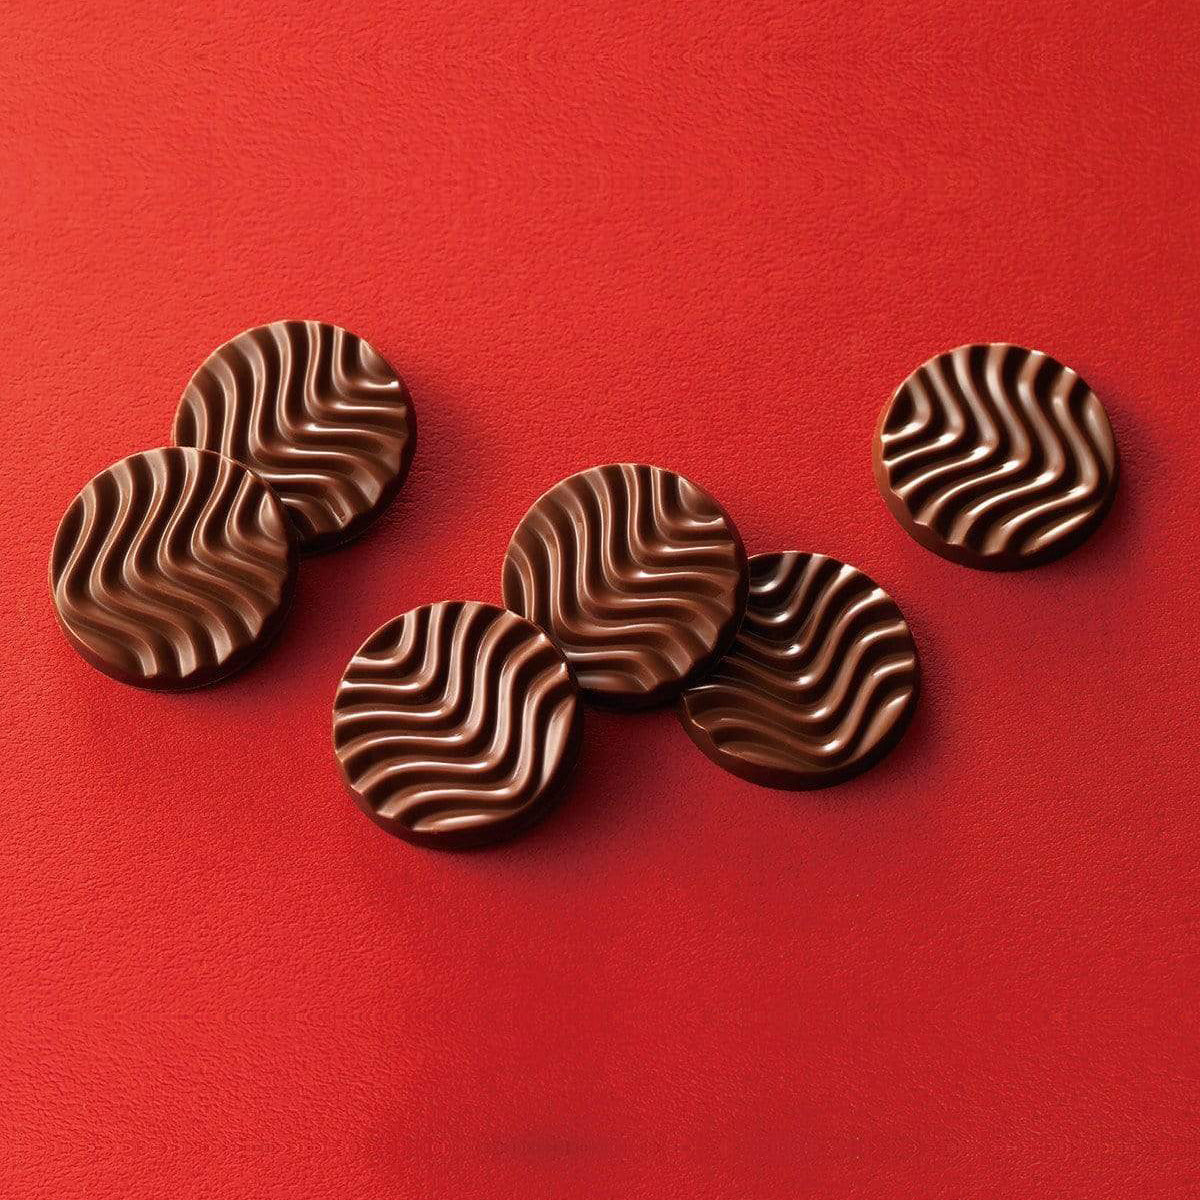 ROYCE' Chocolate - Pure Chocolate "Milk" - Image shows brown chocolate discs with a waved texture. Background and surface is in red color.